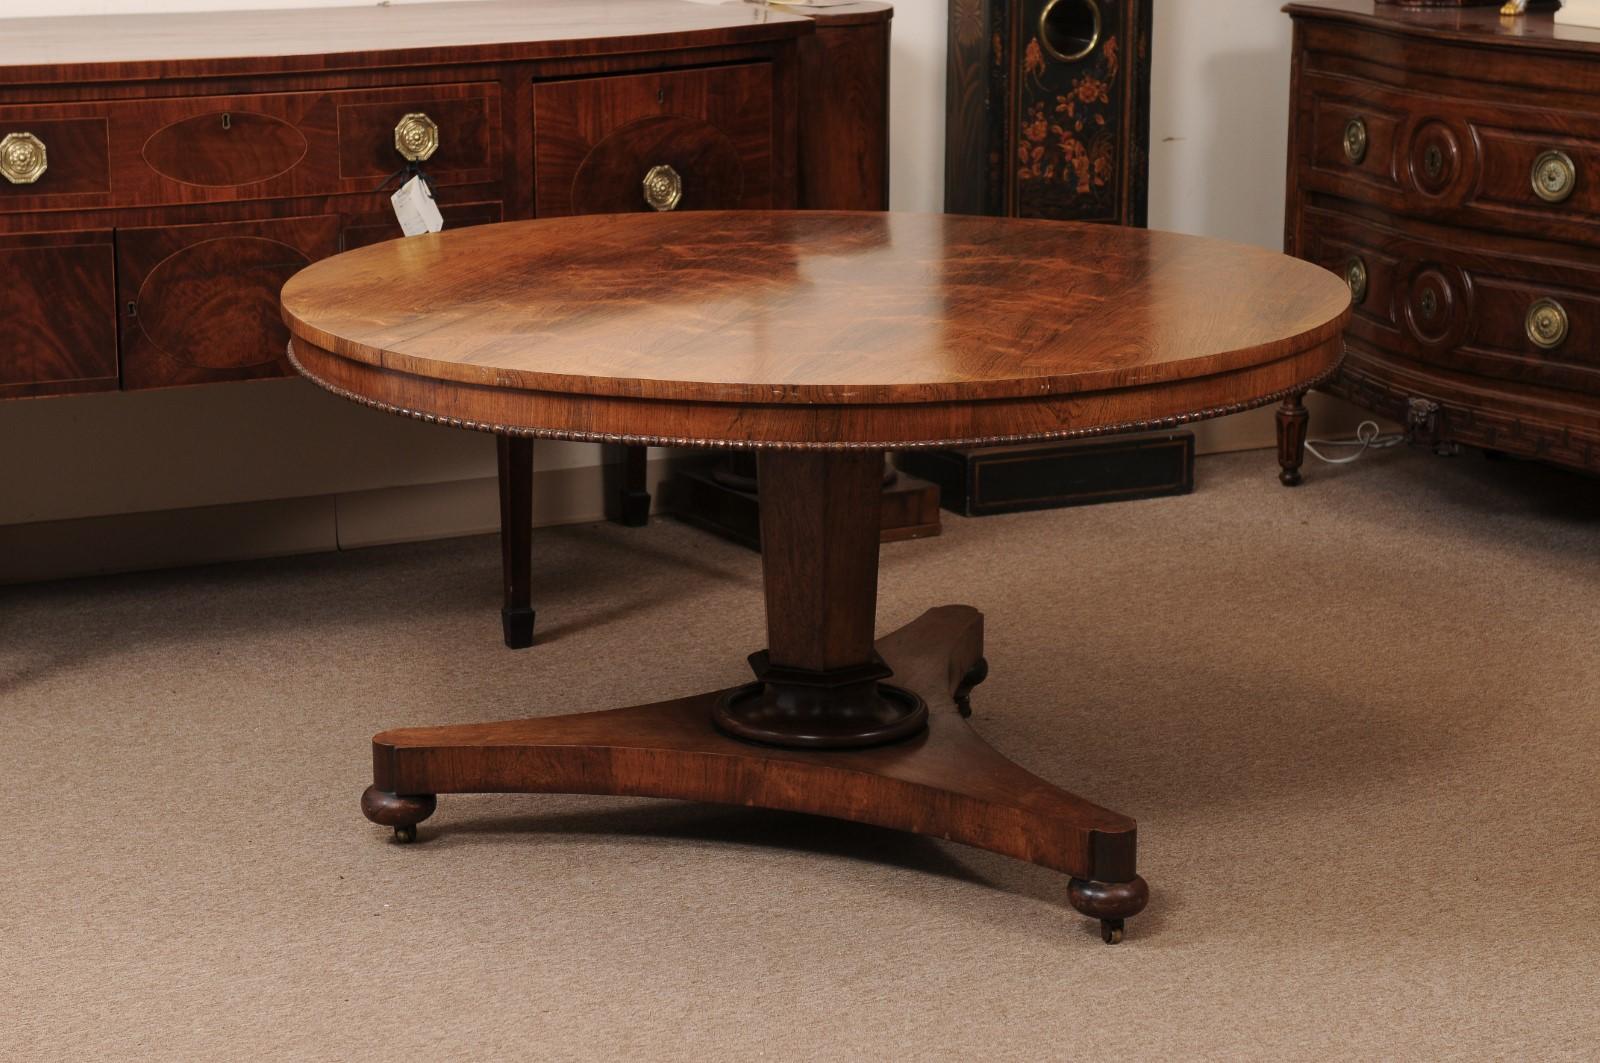 English 19th Century Rosewood Center Table with Beaded Egde and Pedestal Base an 1